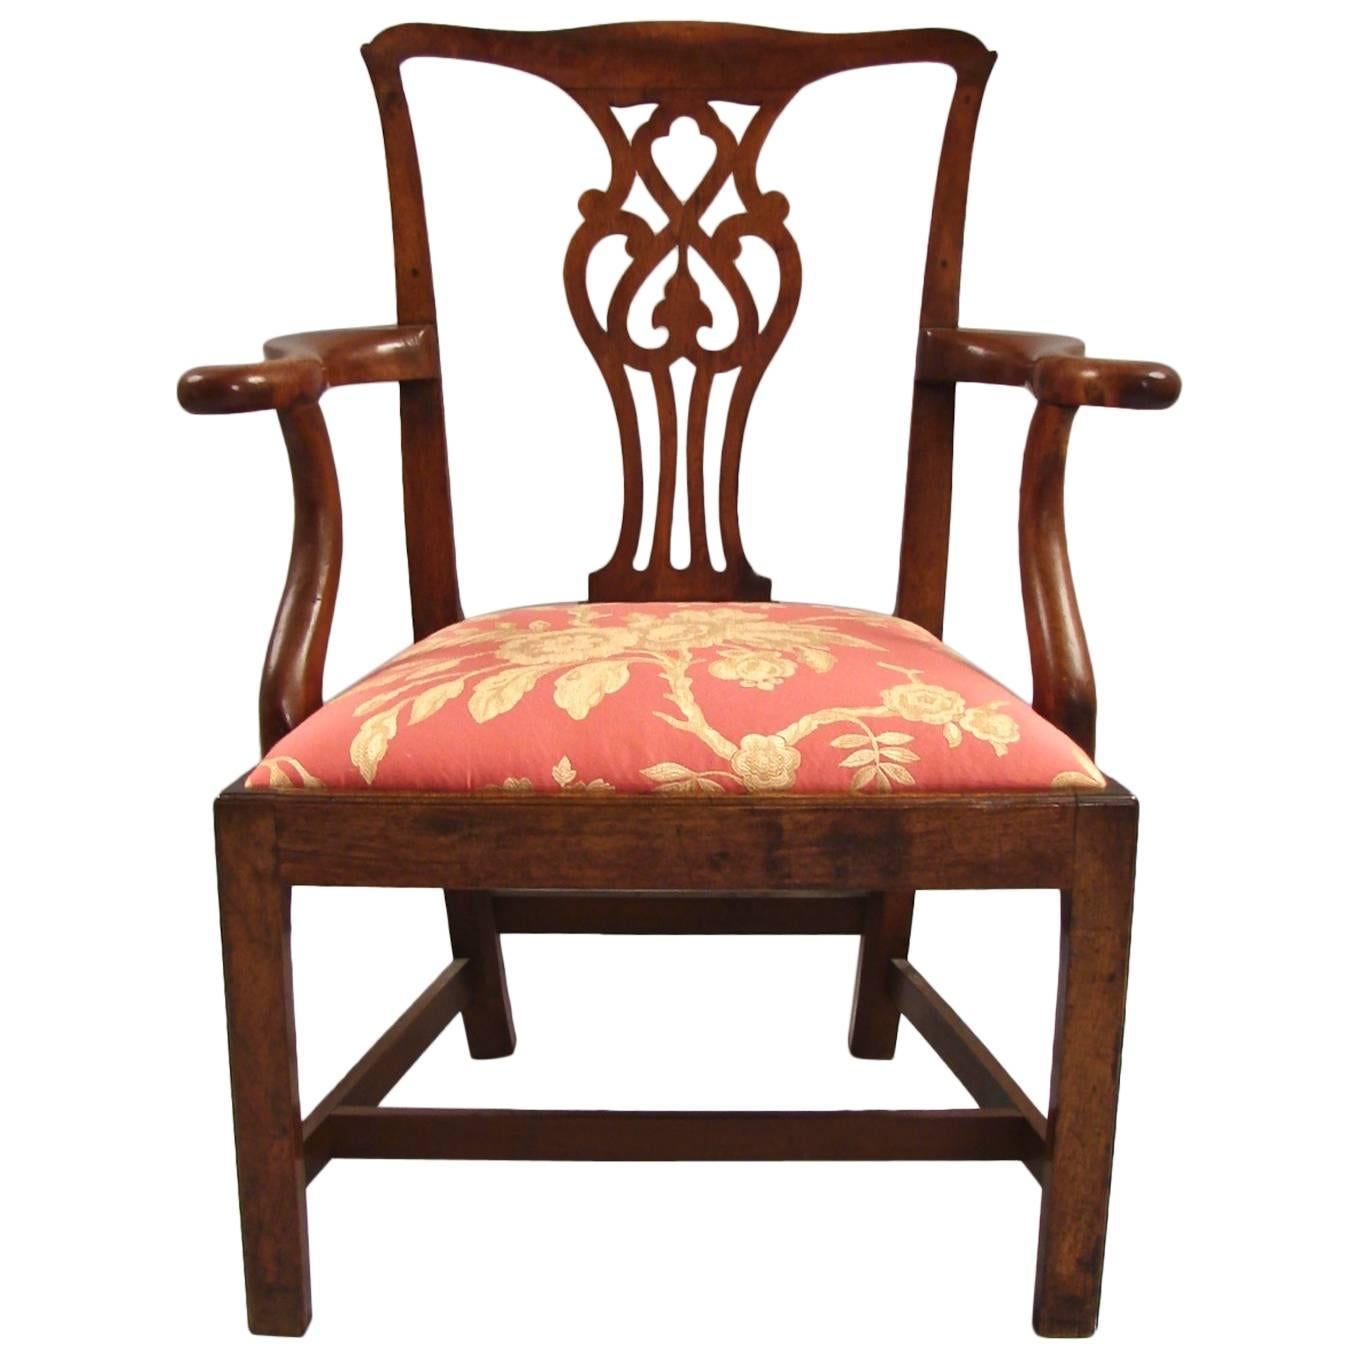 George III Mahogany Armchair with Damask Upholstered Seat